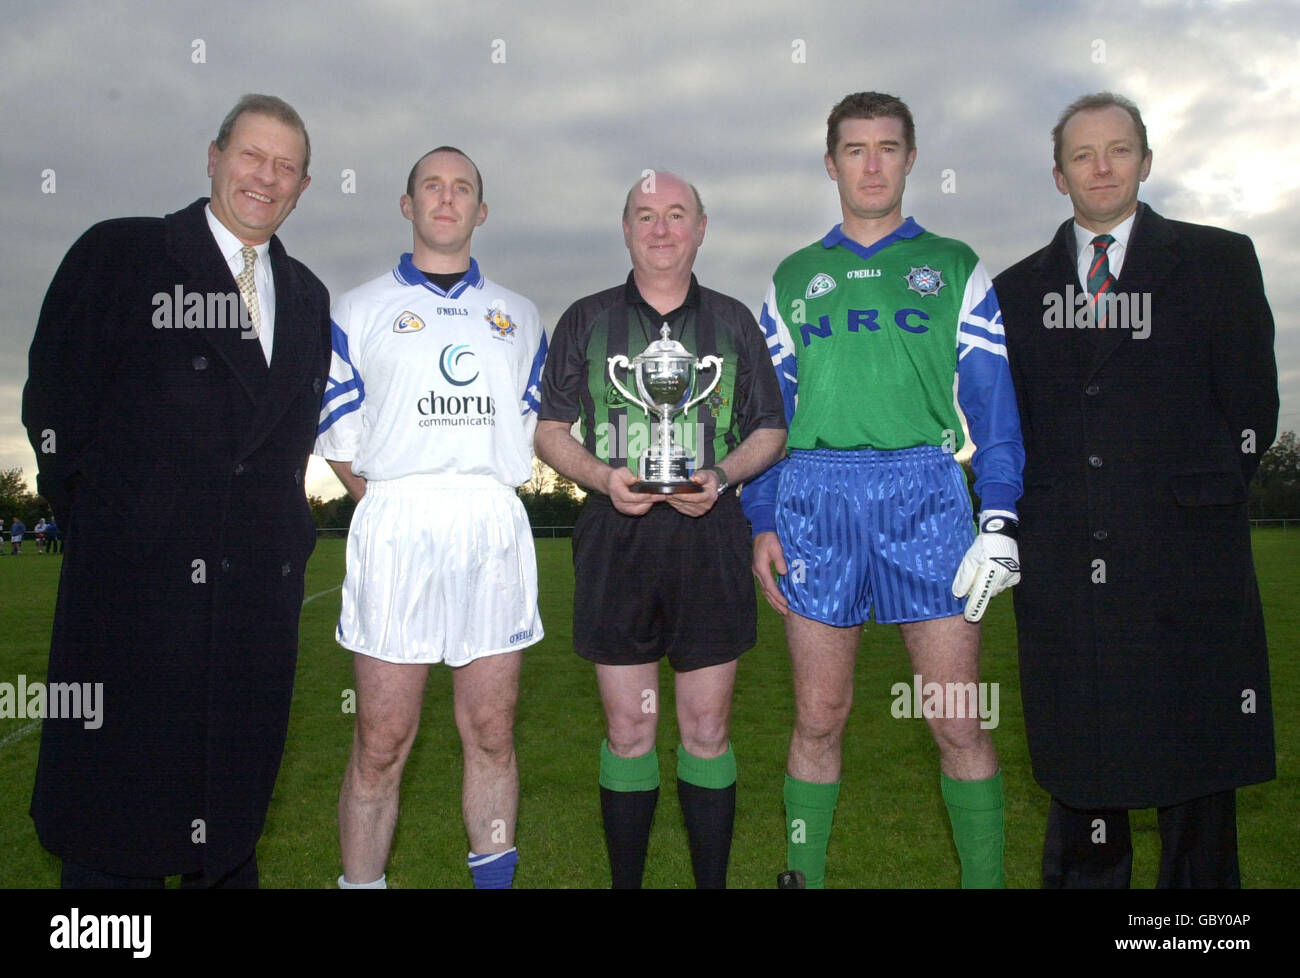 (L-R) Garda Commissioner Pat Byrne, An Garda Siochana captain Damian Tucker, referee Senan Finucane (holding the trophy that the two teams contested), Police Service of Northern Ireland captain John Keane and PSNI Chief Constable Hugh Orde line up before the inaugural match between the two police forces. The match was made possible by the abolition of GAA Rule 21, which banned members of the Northern Ireland security forces from playing the game Stock Photo